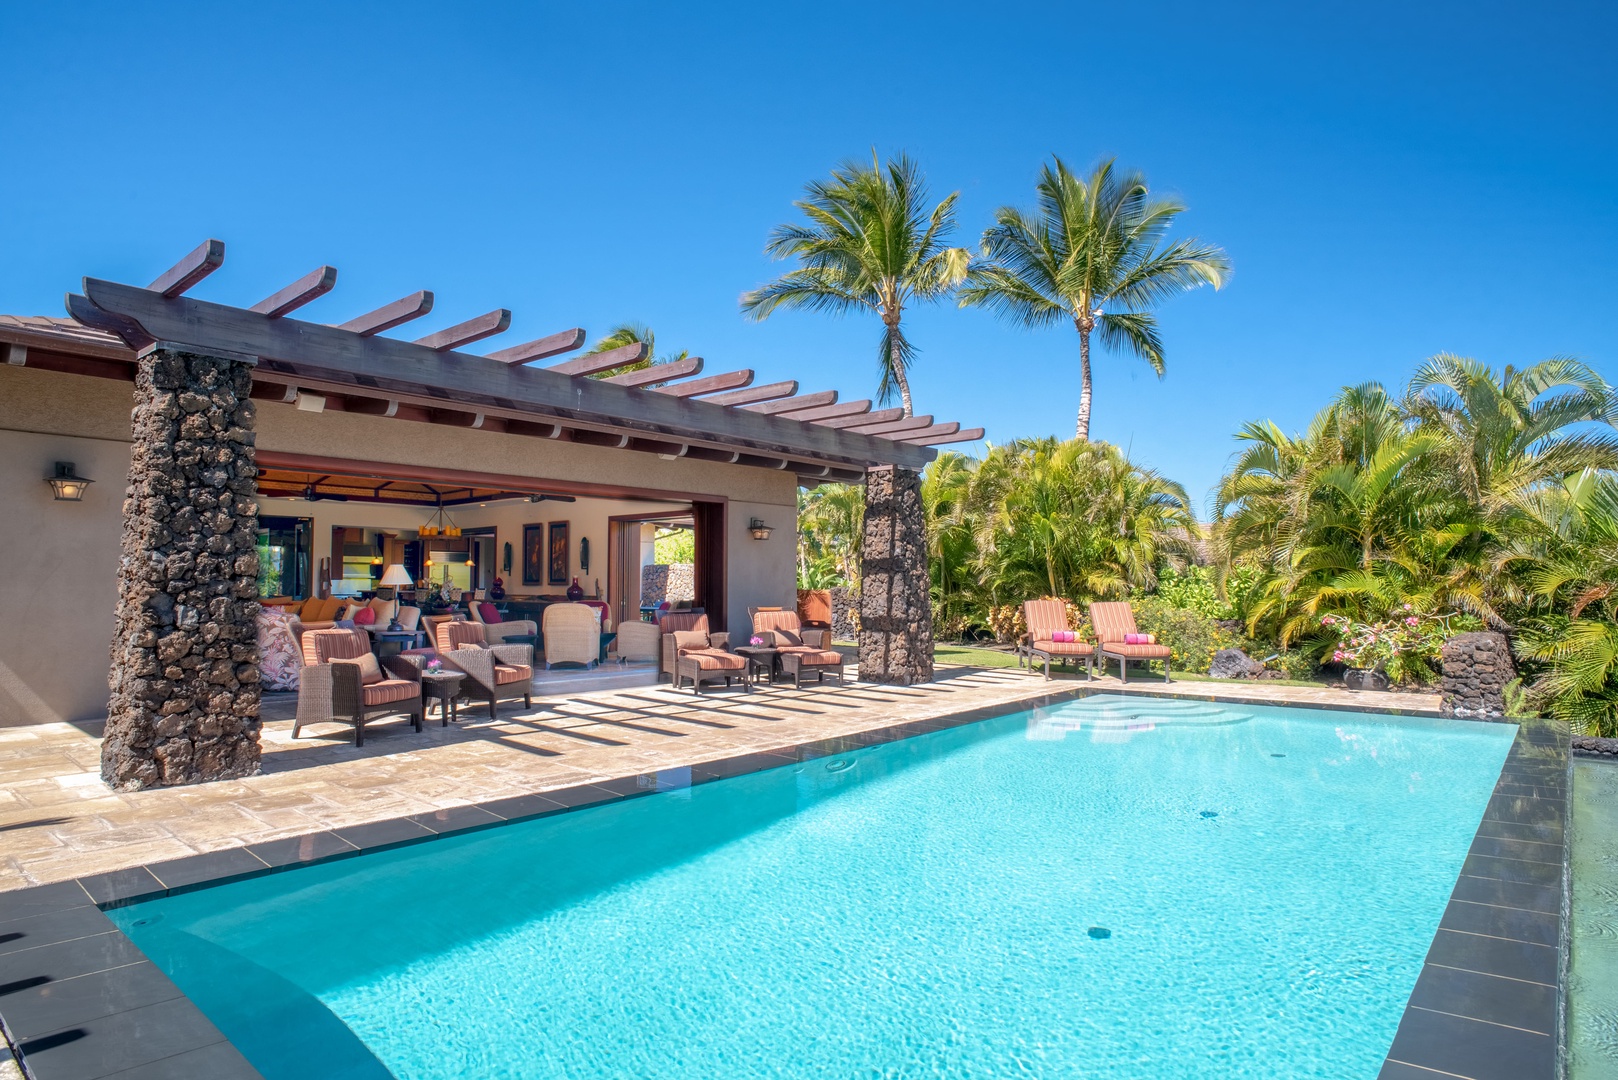 Kamuela Vacation Rentals, House of the Turtle at Champion Ridge, Mauna Lani (CR 18) - Plenty of Places to Relax by the Pool